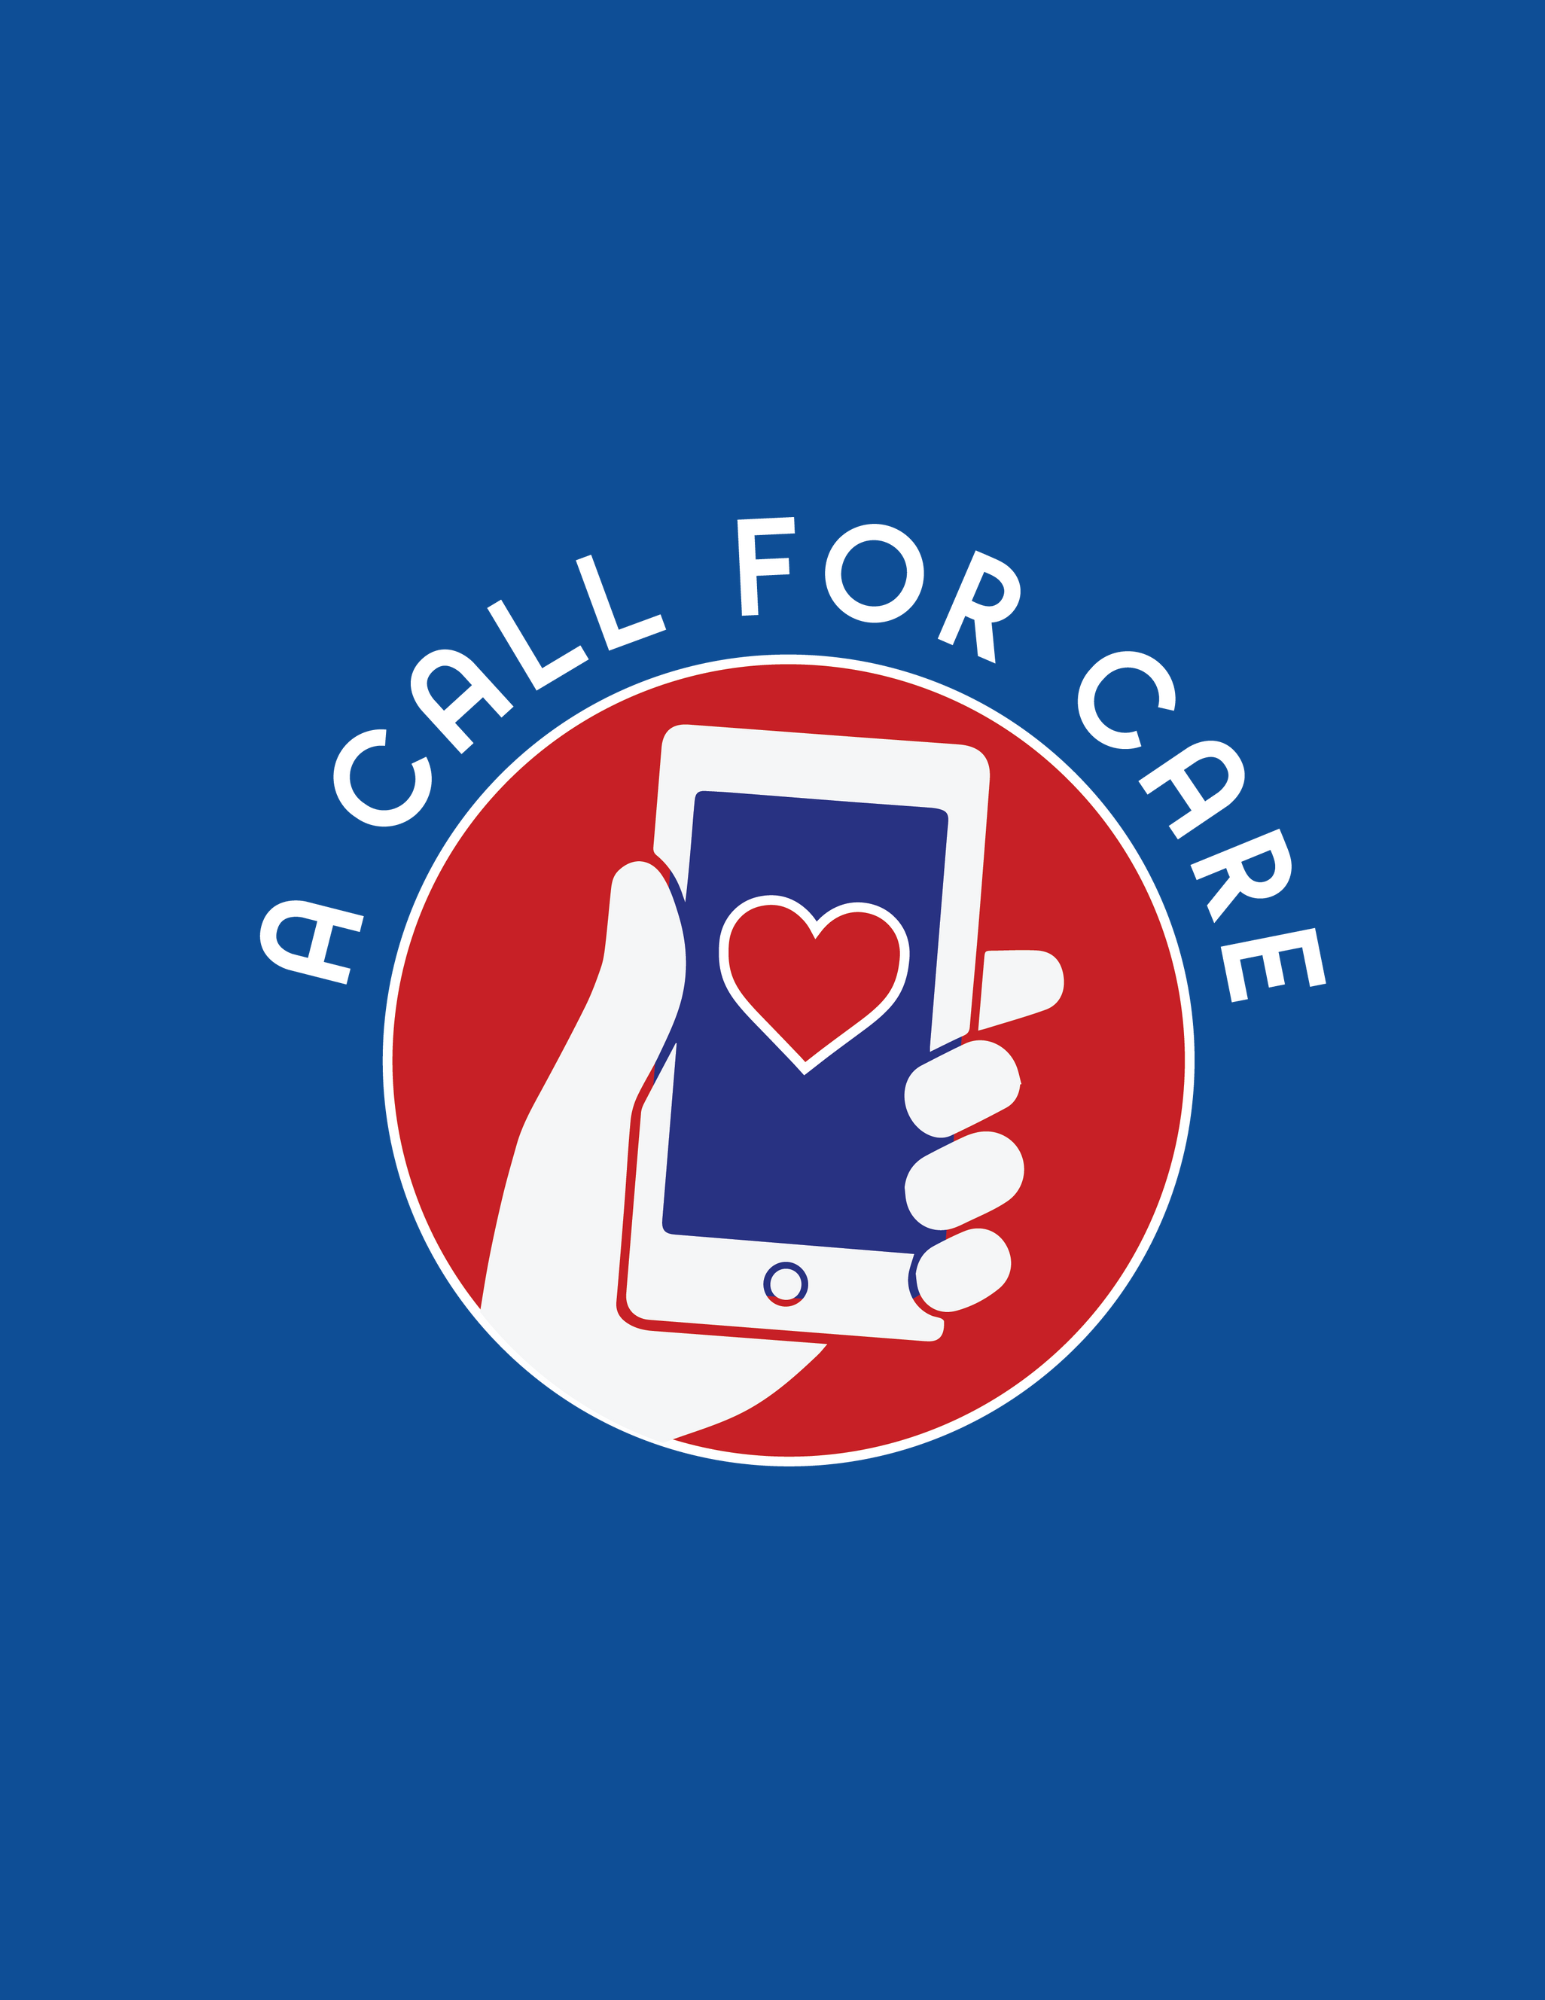 A Call for Care Messaging Guide